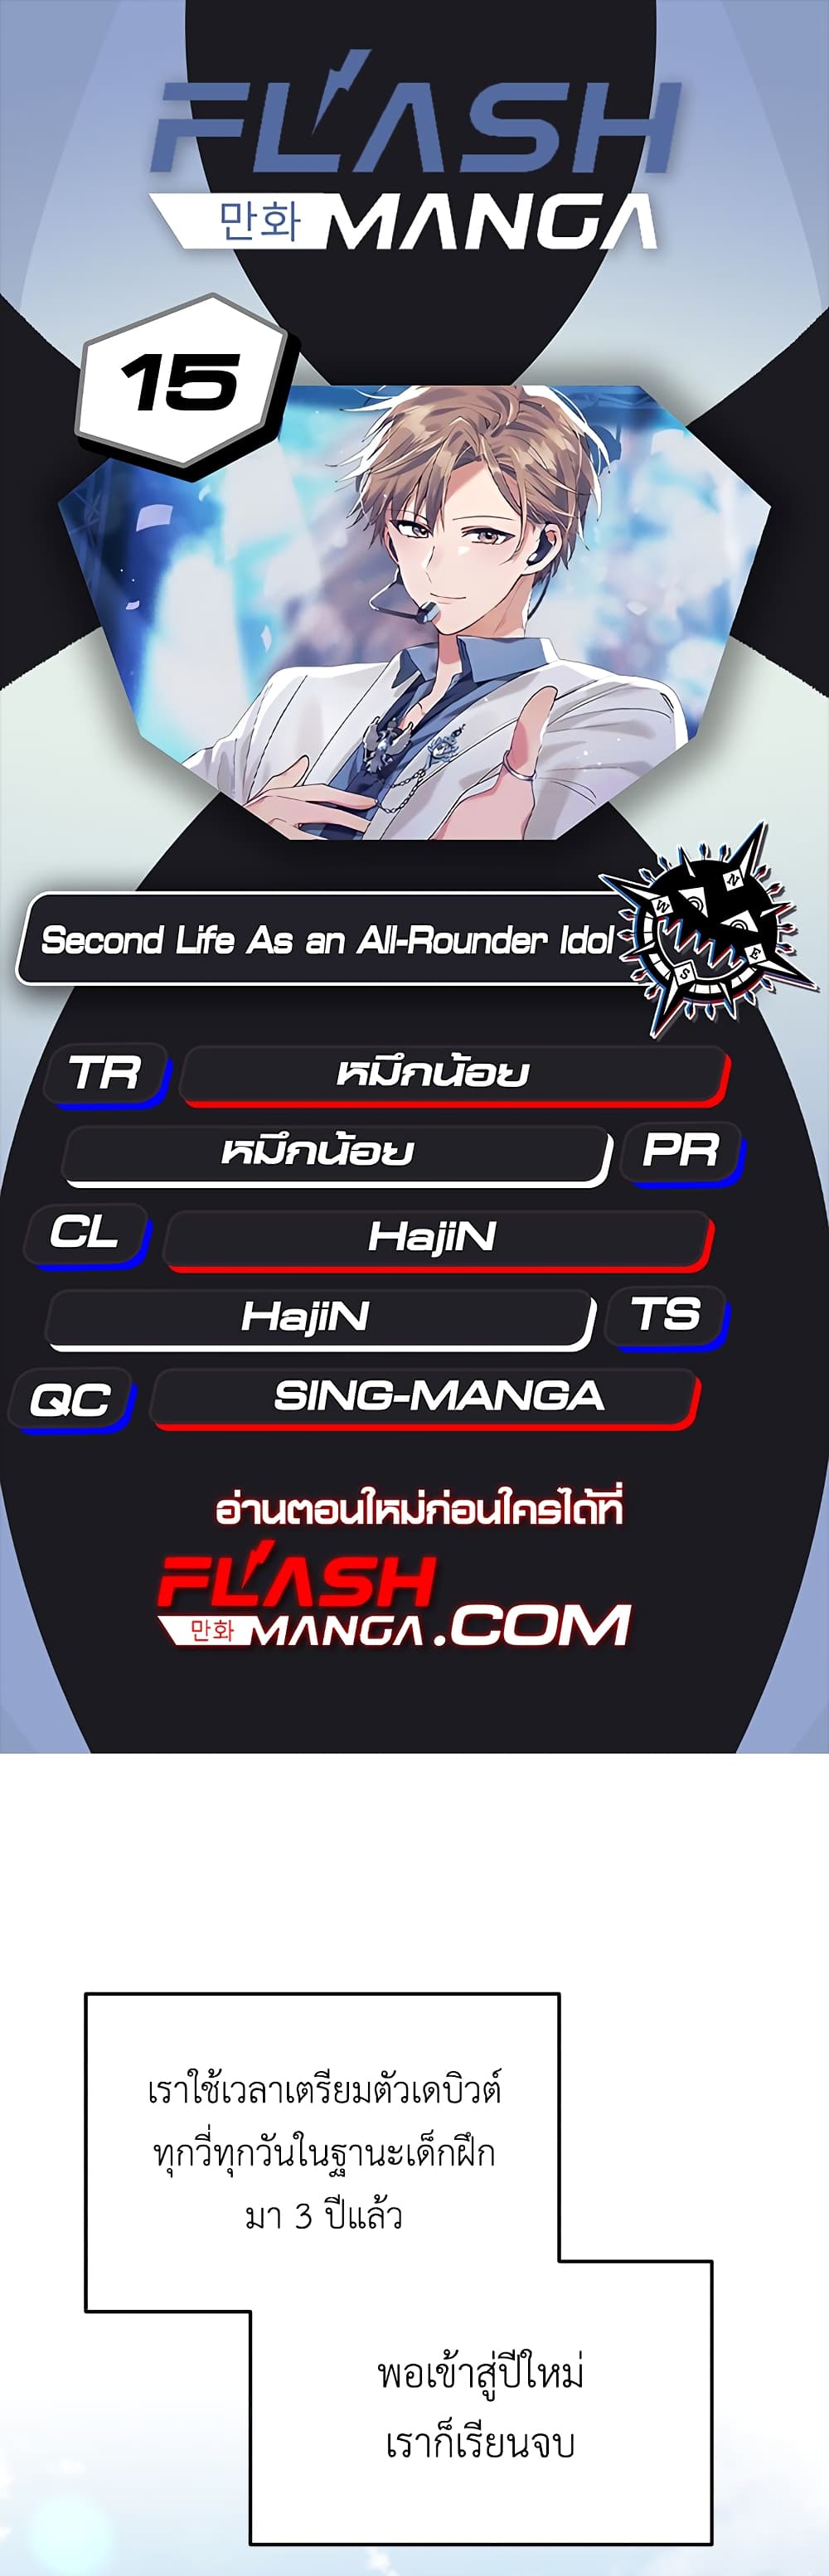 The Second Life of an All-Rounder Idol 15-15